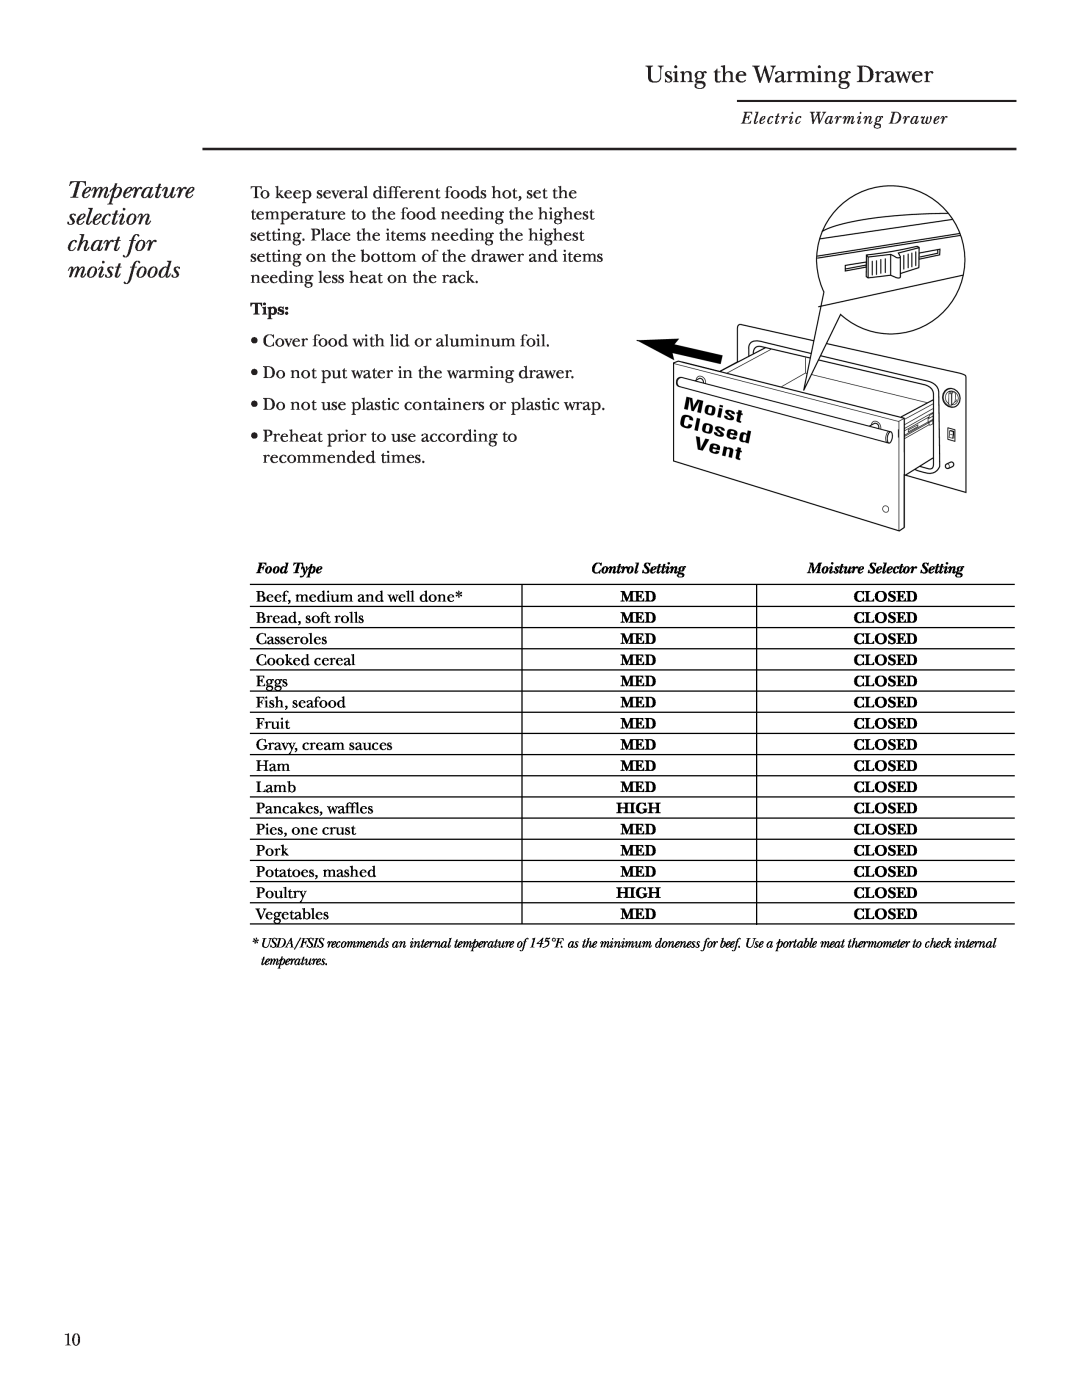 GE ZKD910 owner manual Temperature selection chart for moist foods, Using the Warming Drawer, Vent, Moist, Closed 